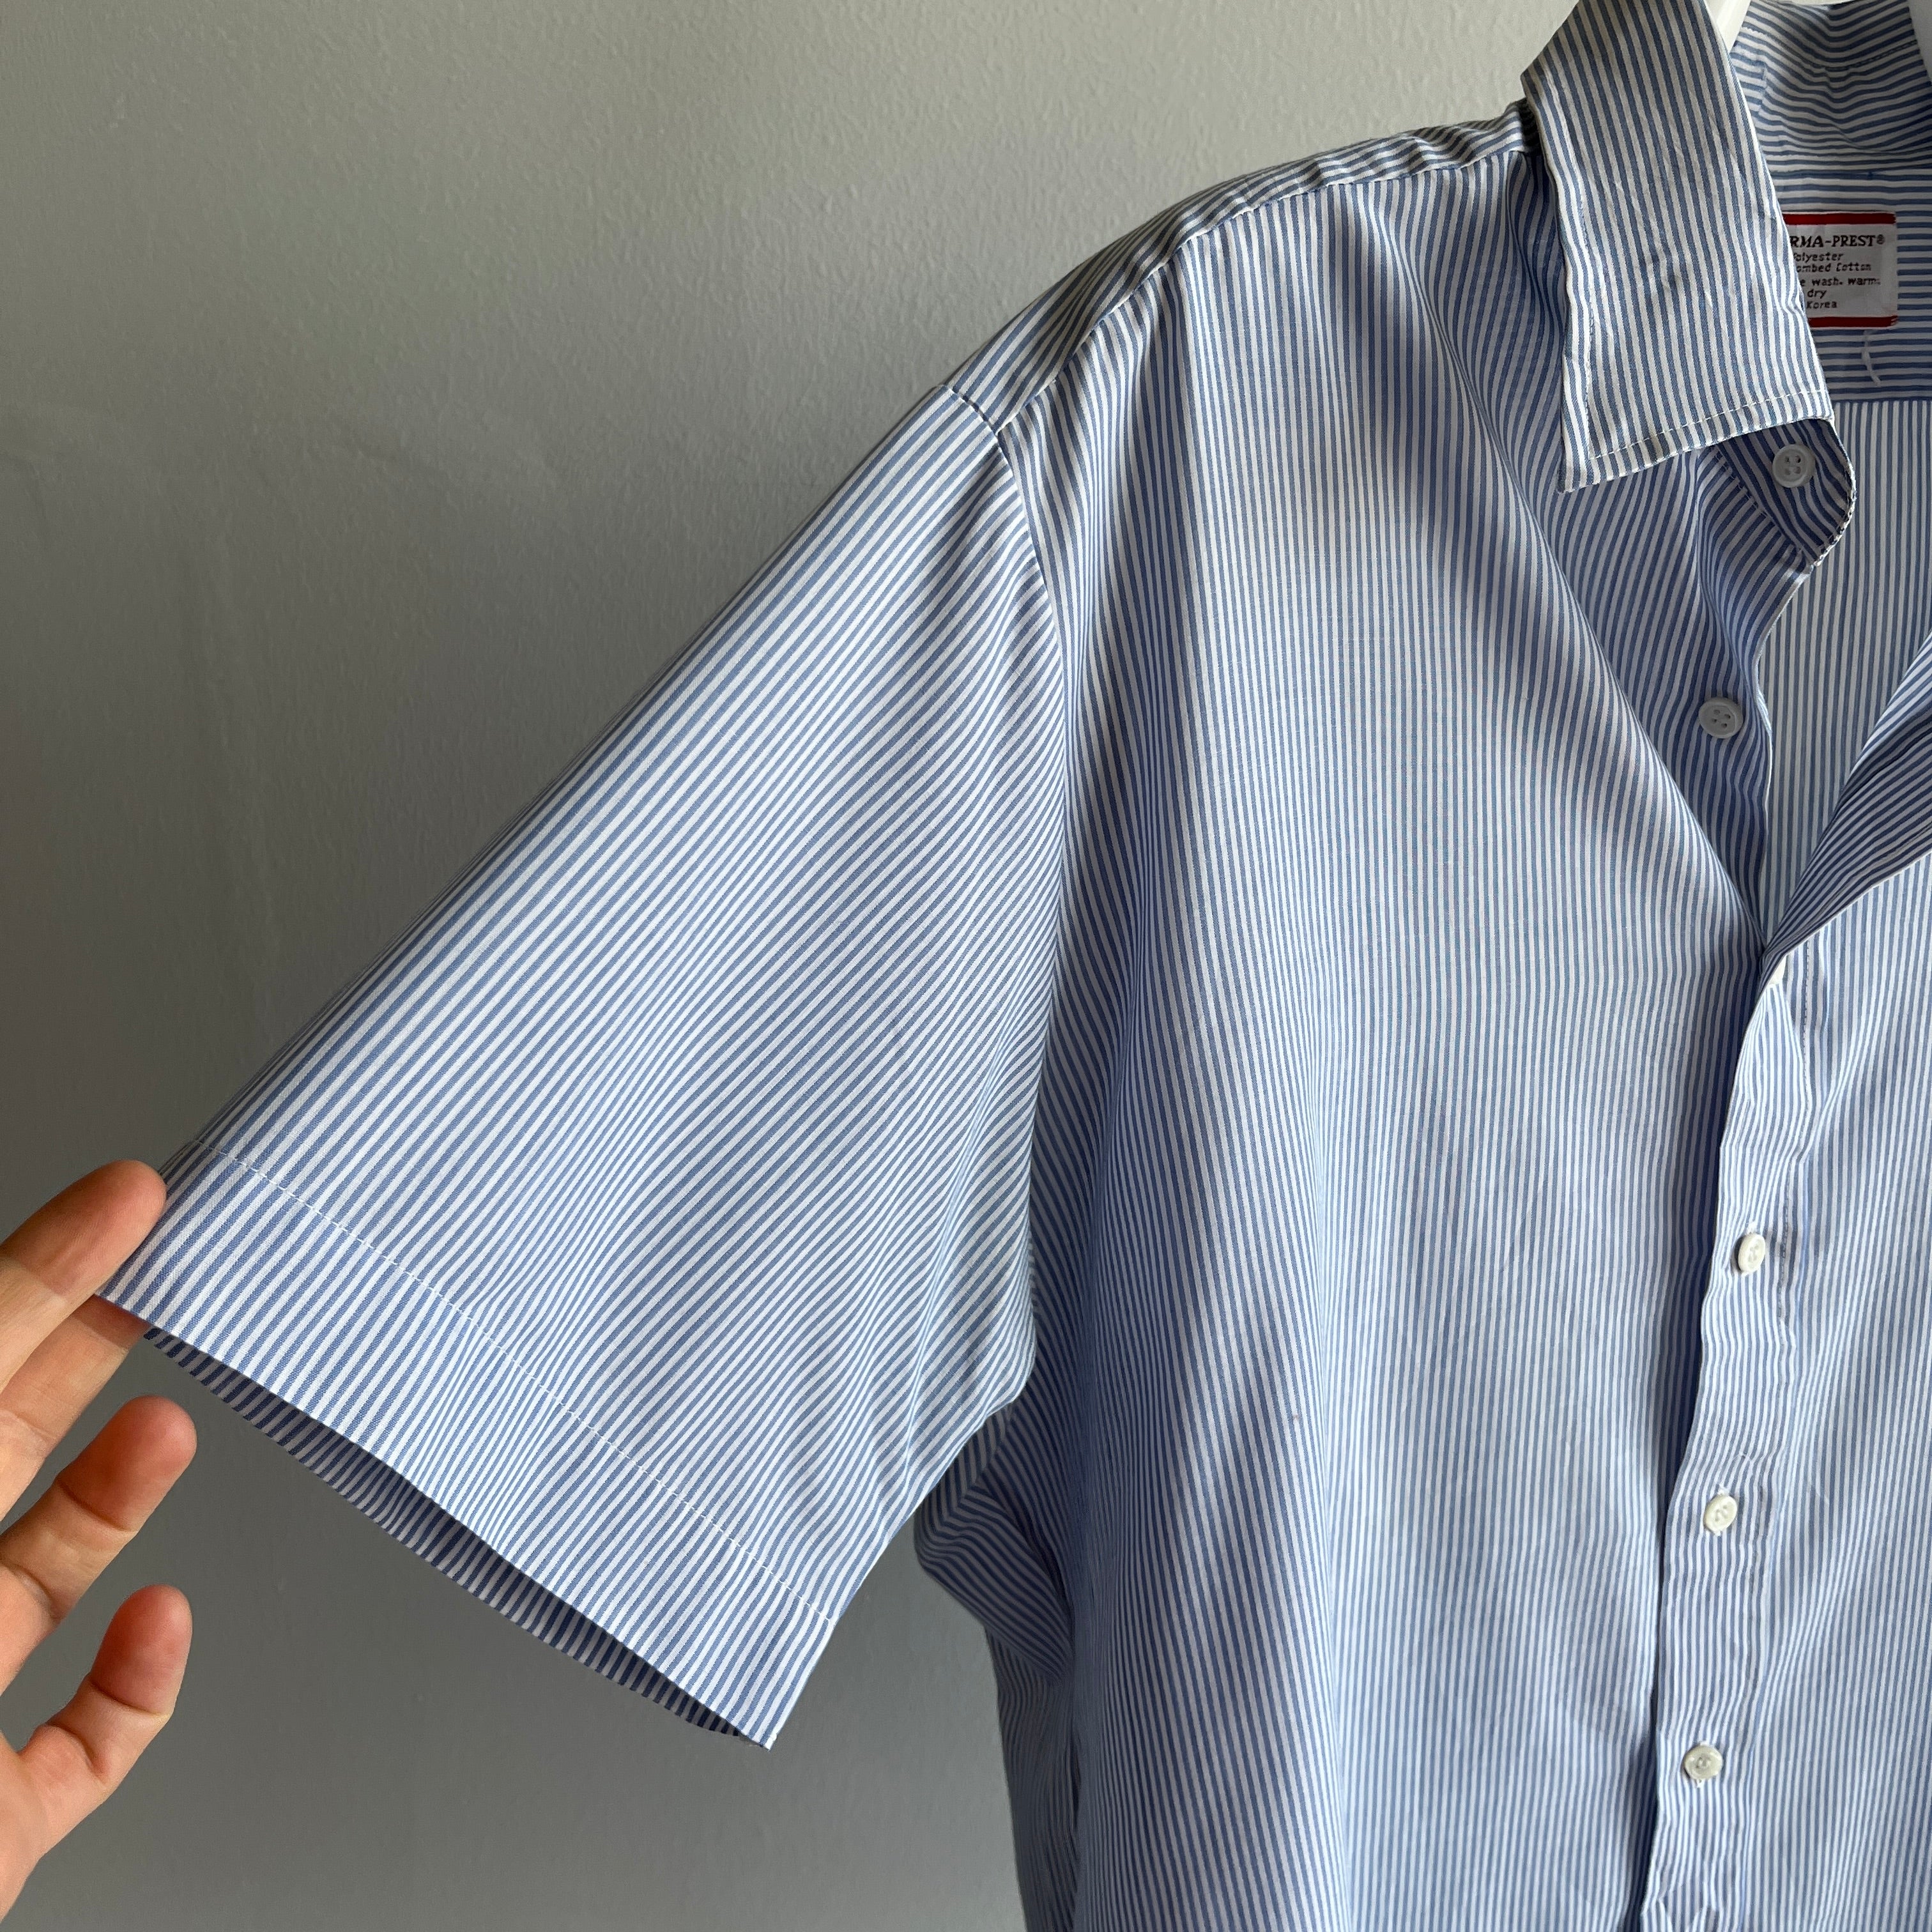 1980s Blue and White Pinstriped Short Sleeve Lightweight Dad Shirt by Sears